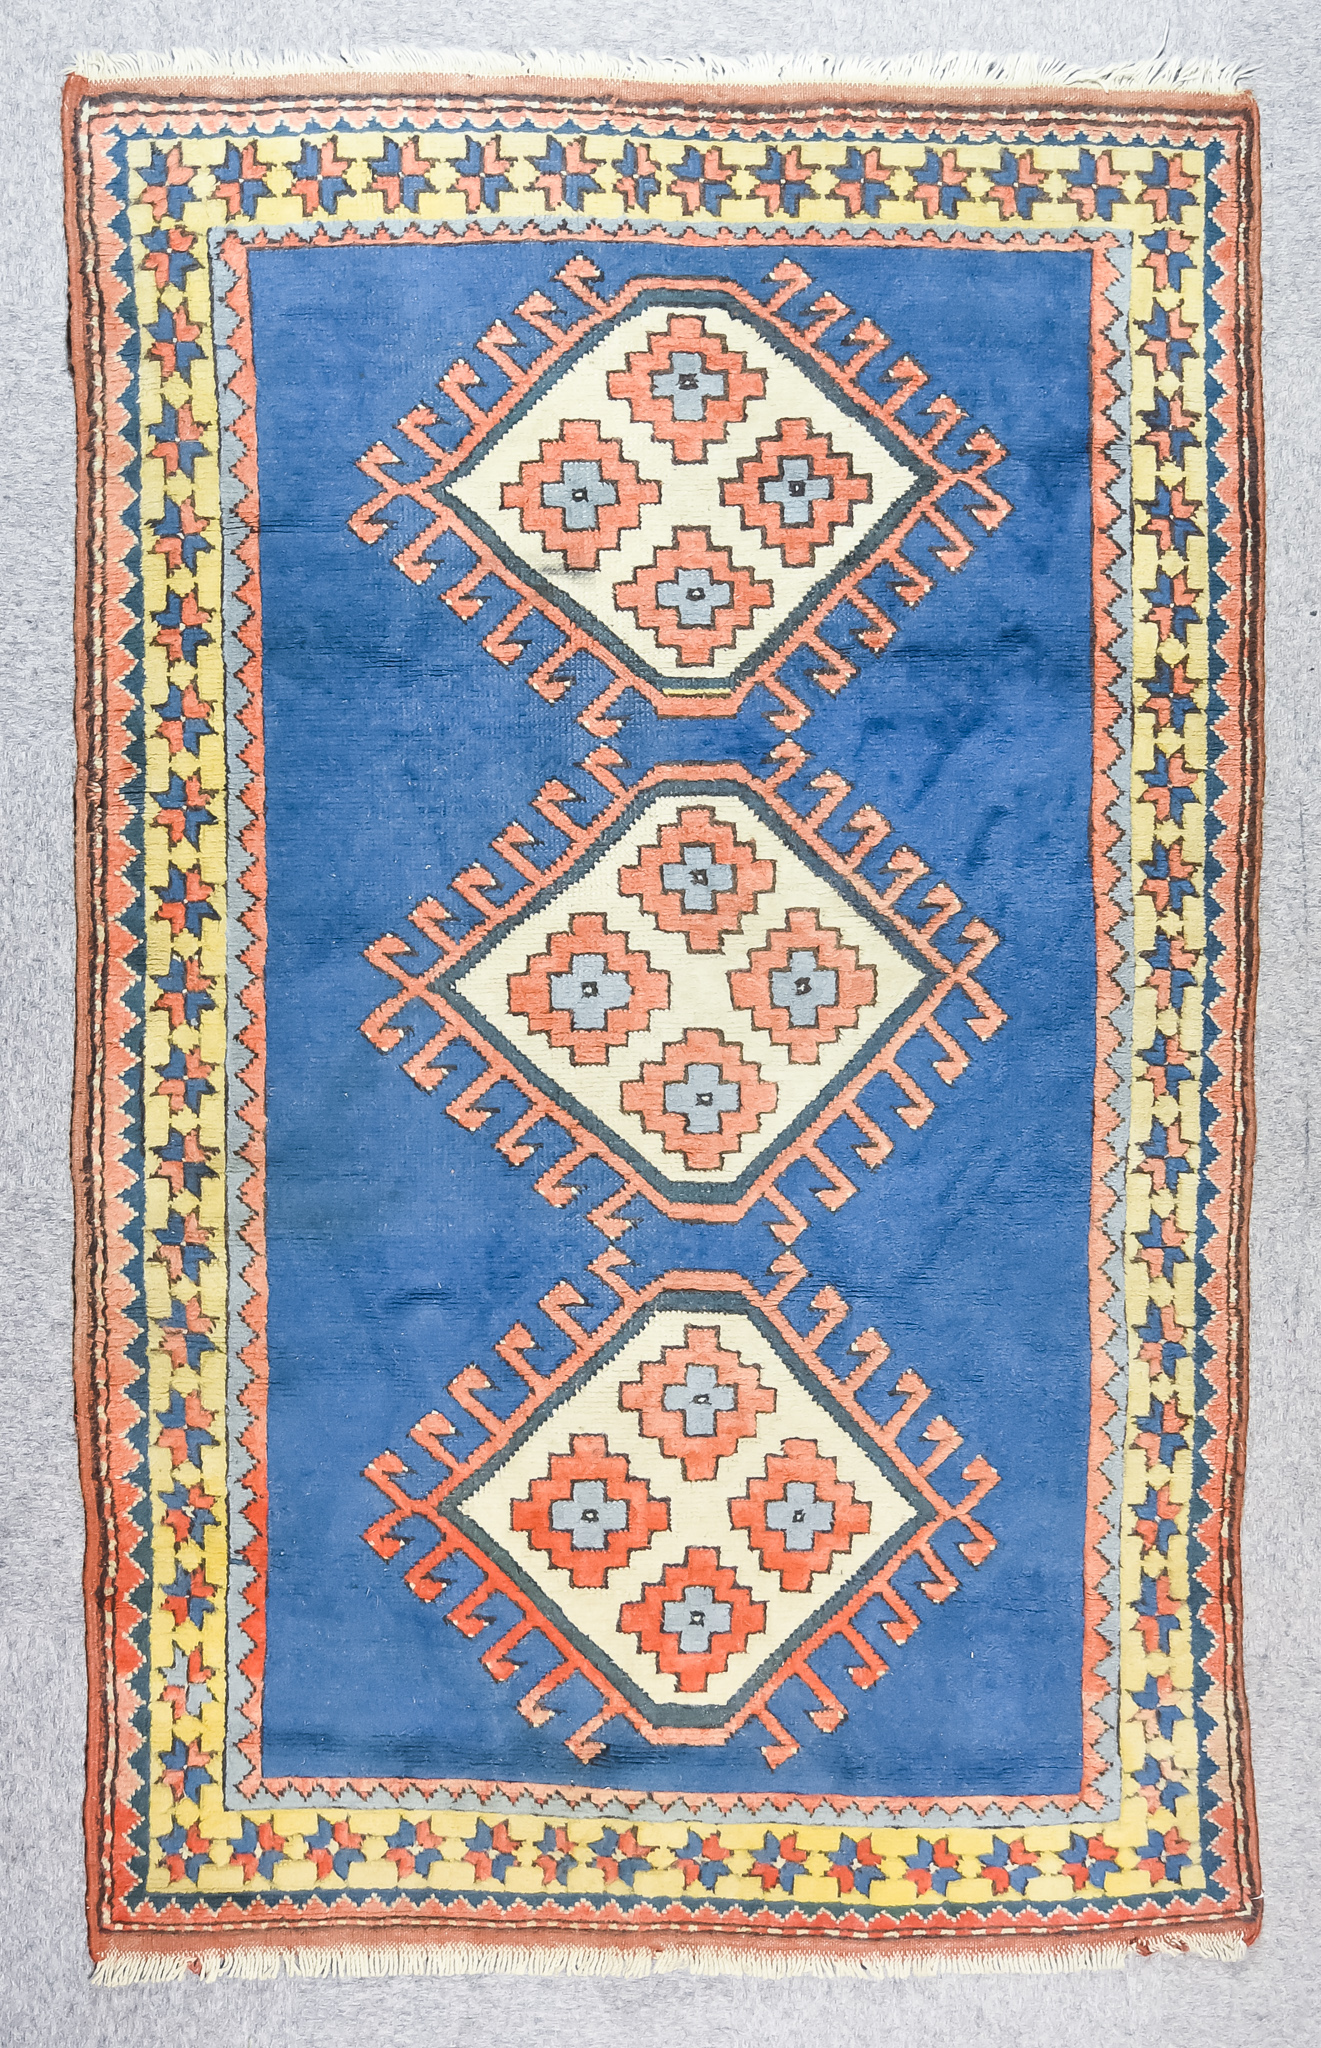 An Anatolian Rug of "Kazak" Design, woven in colours of terracotta, navy blue and fawn, with three